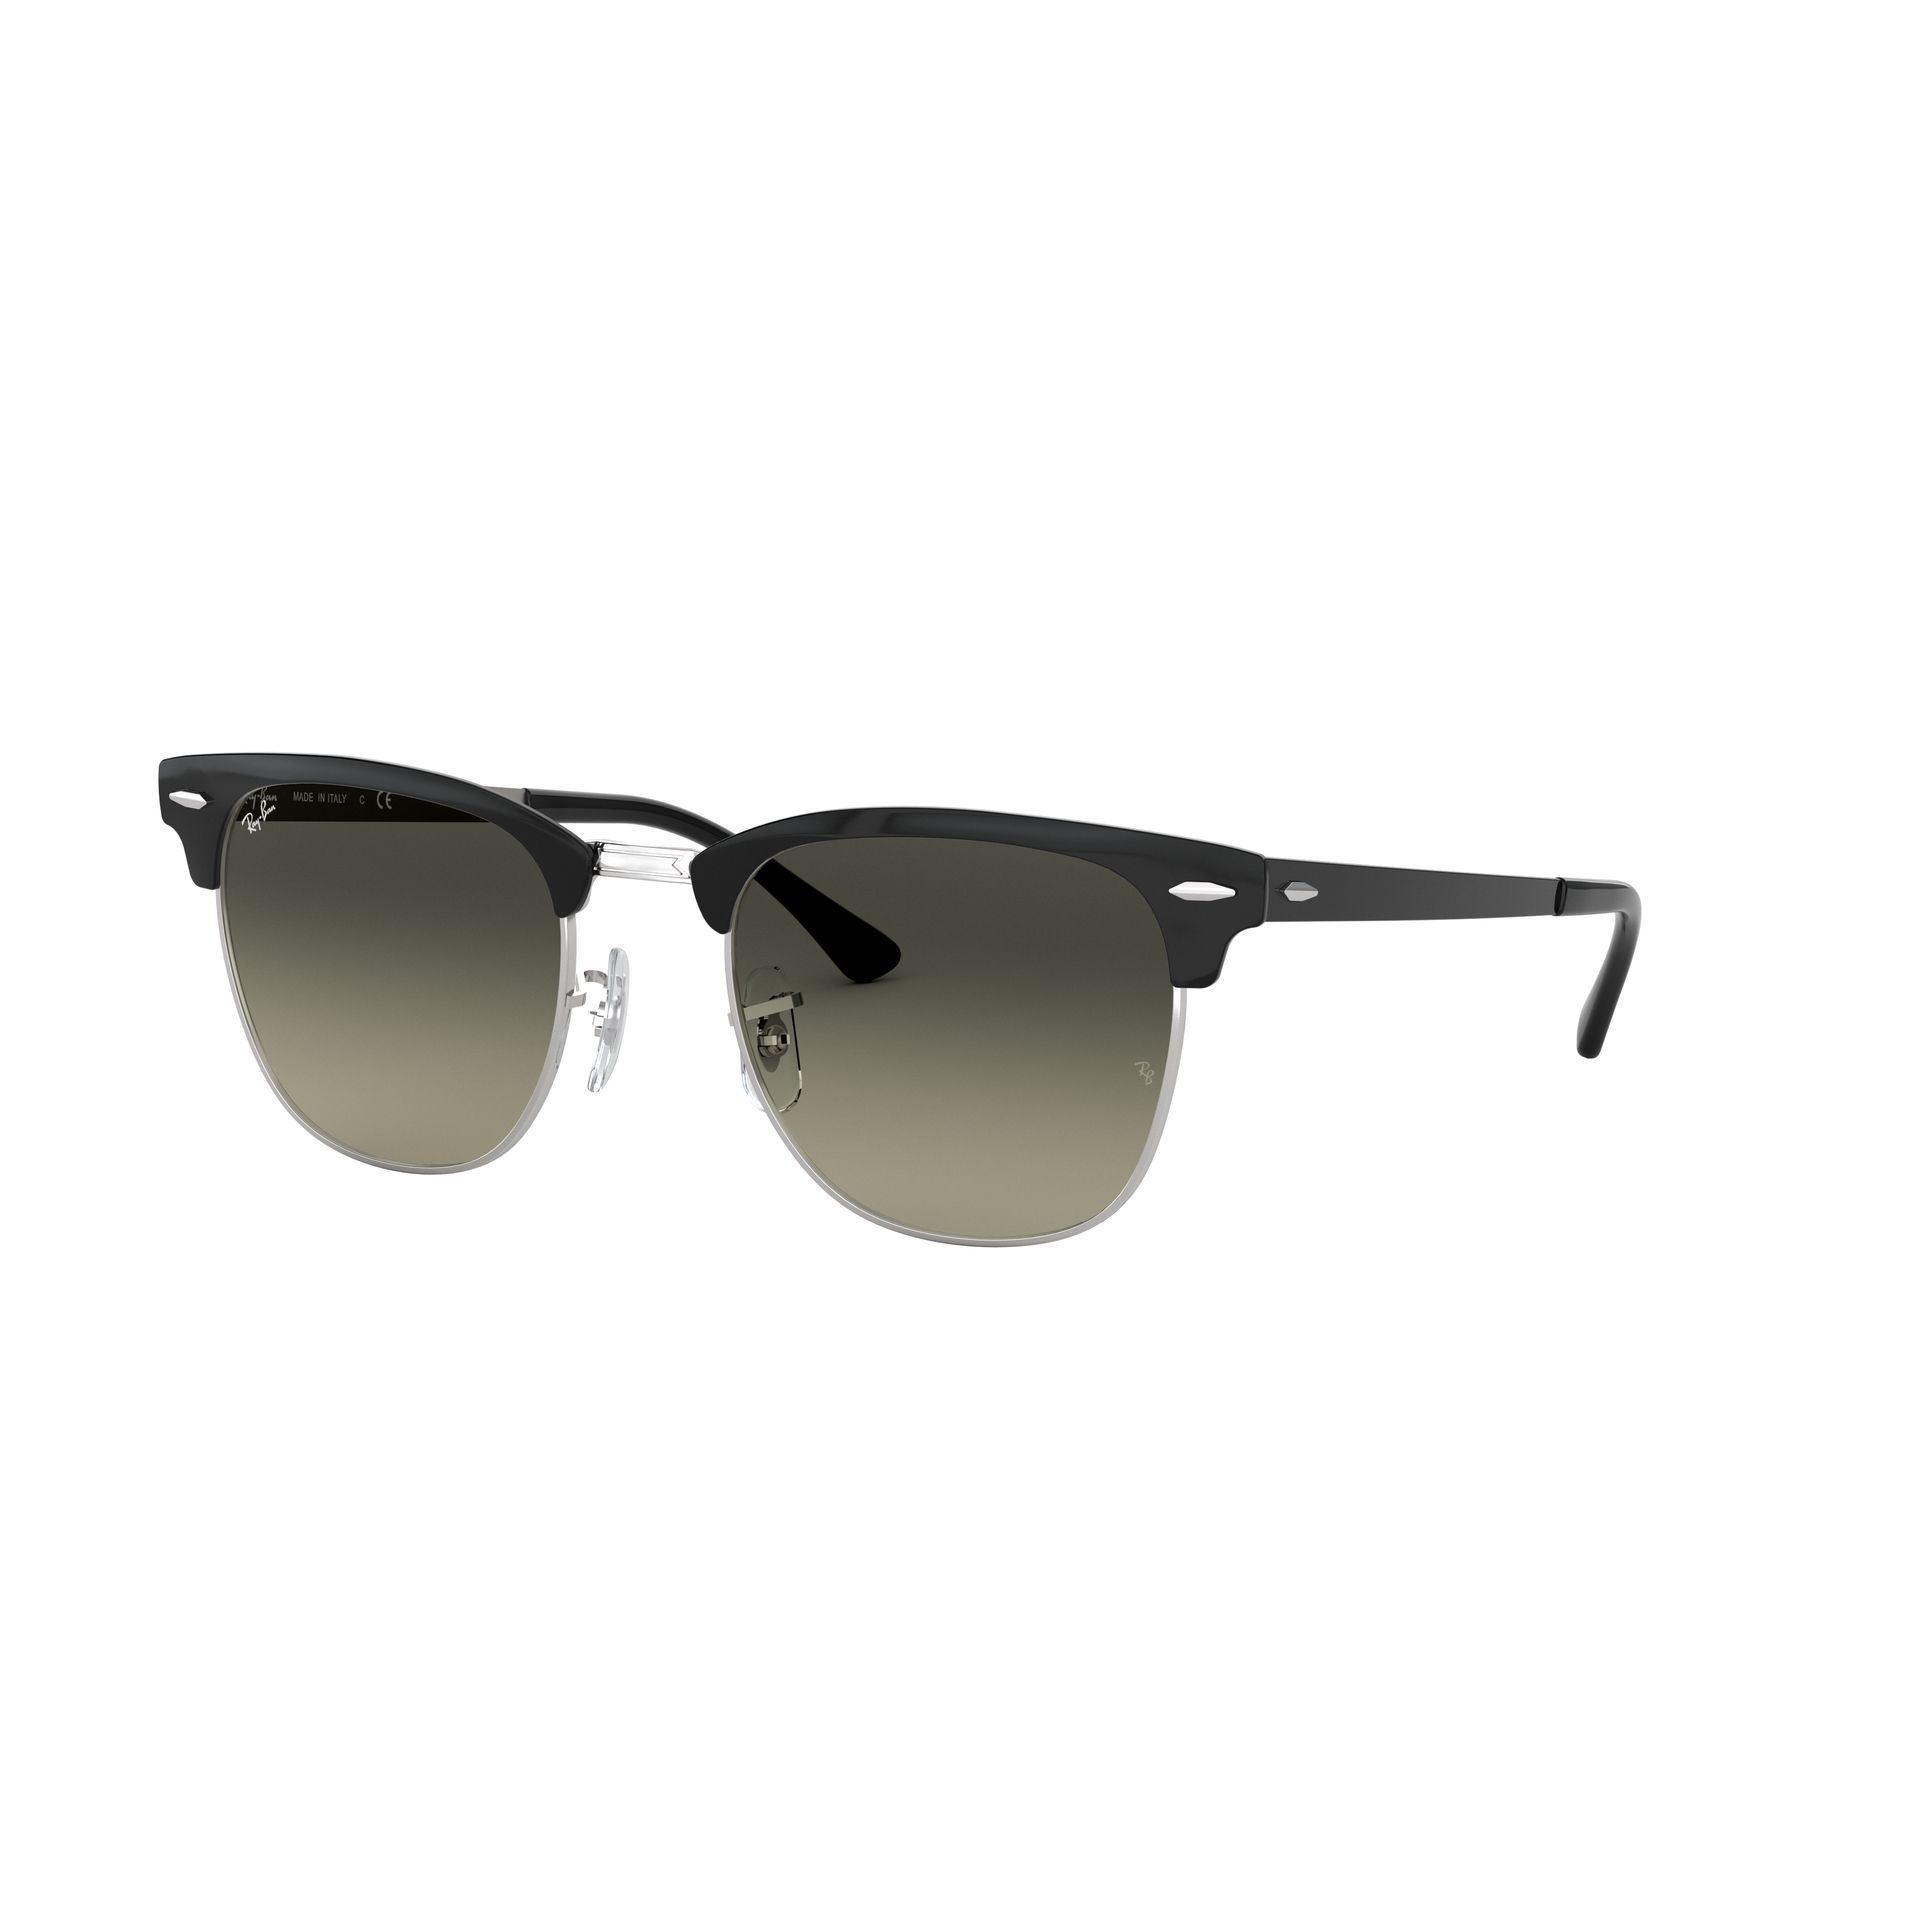 Clubmaster Sunglasses RB3716 900471 - size 51